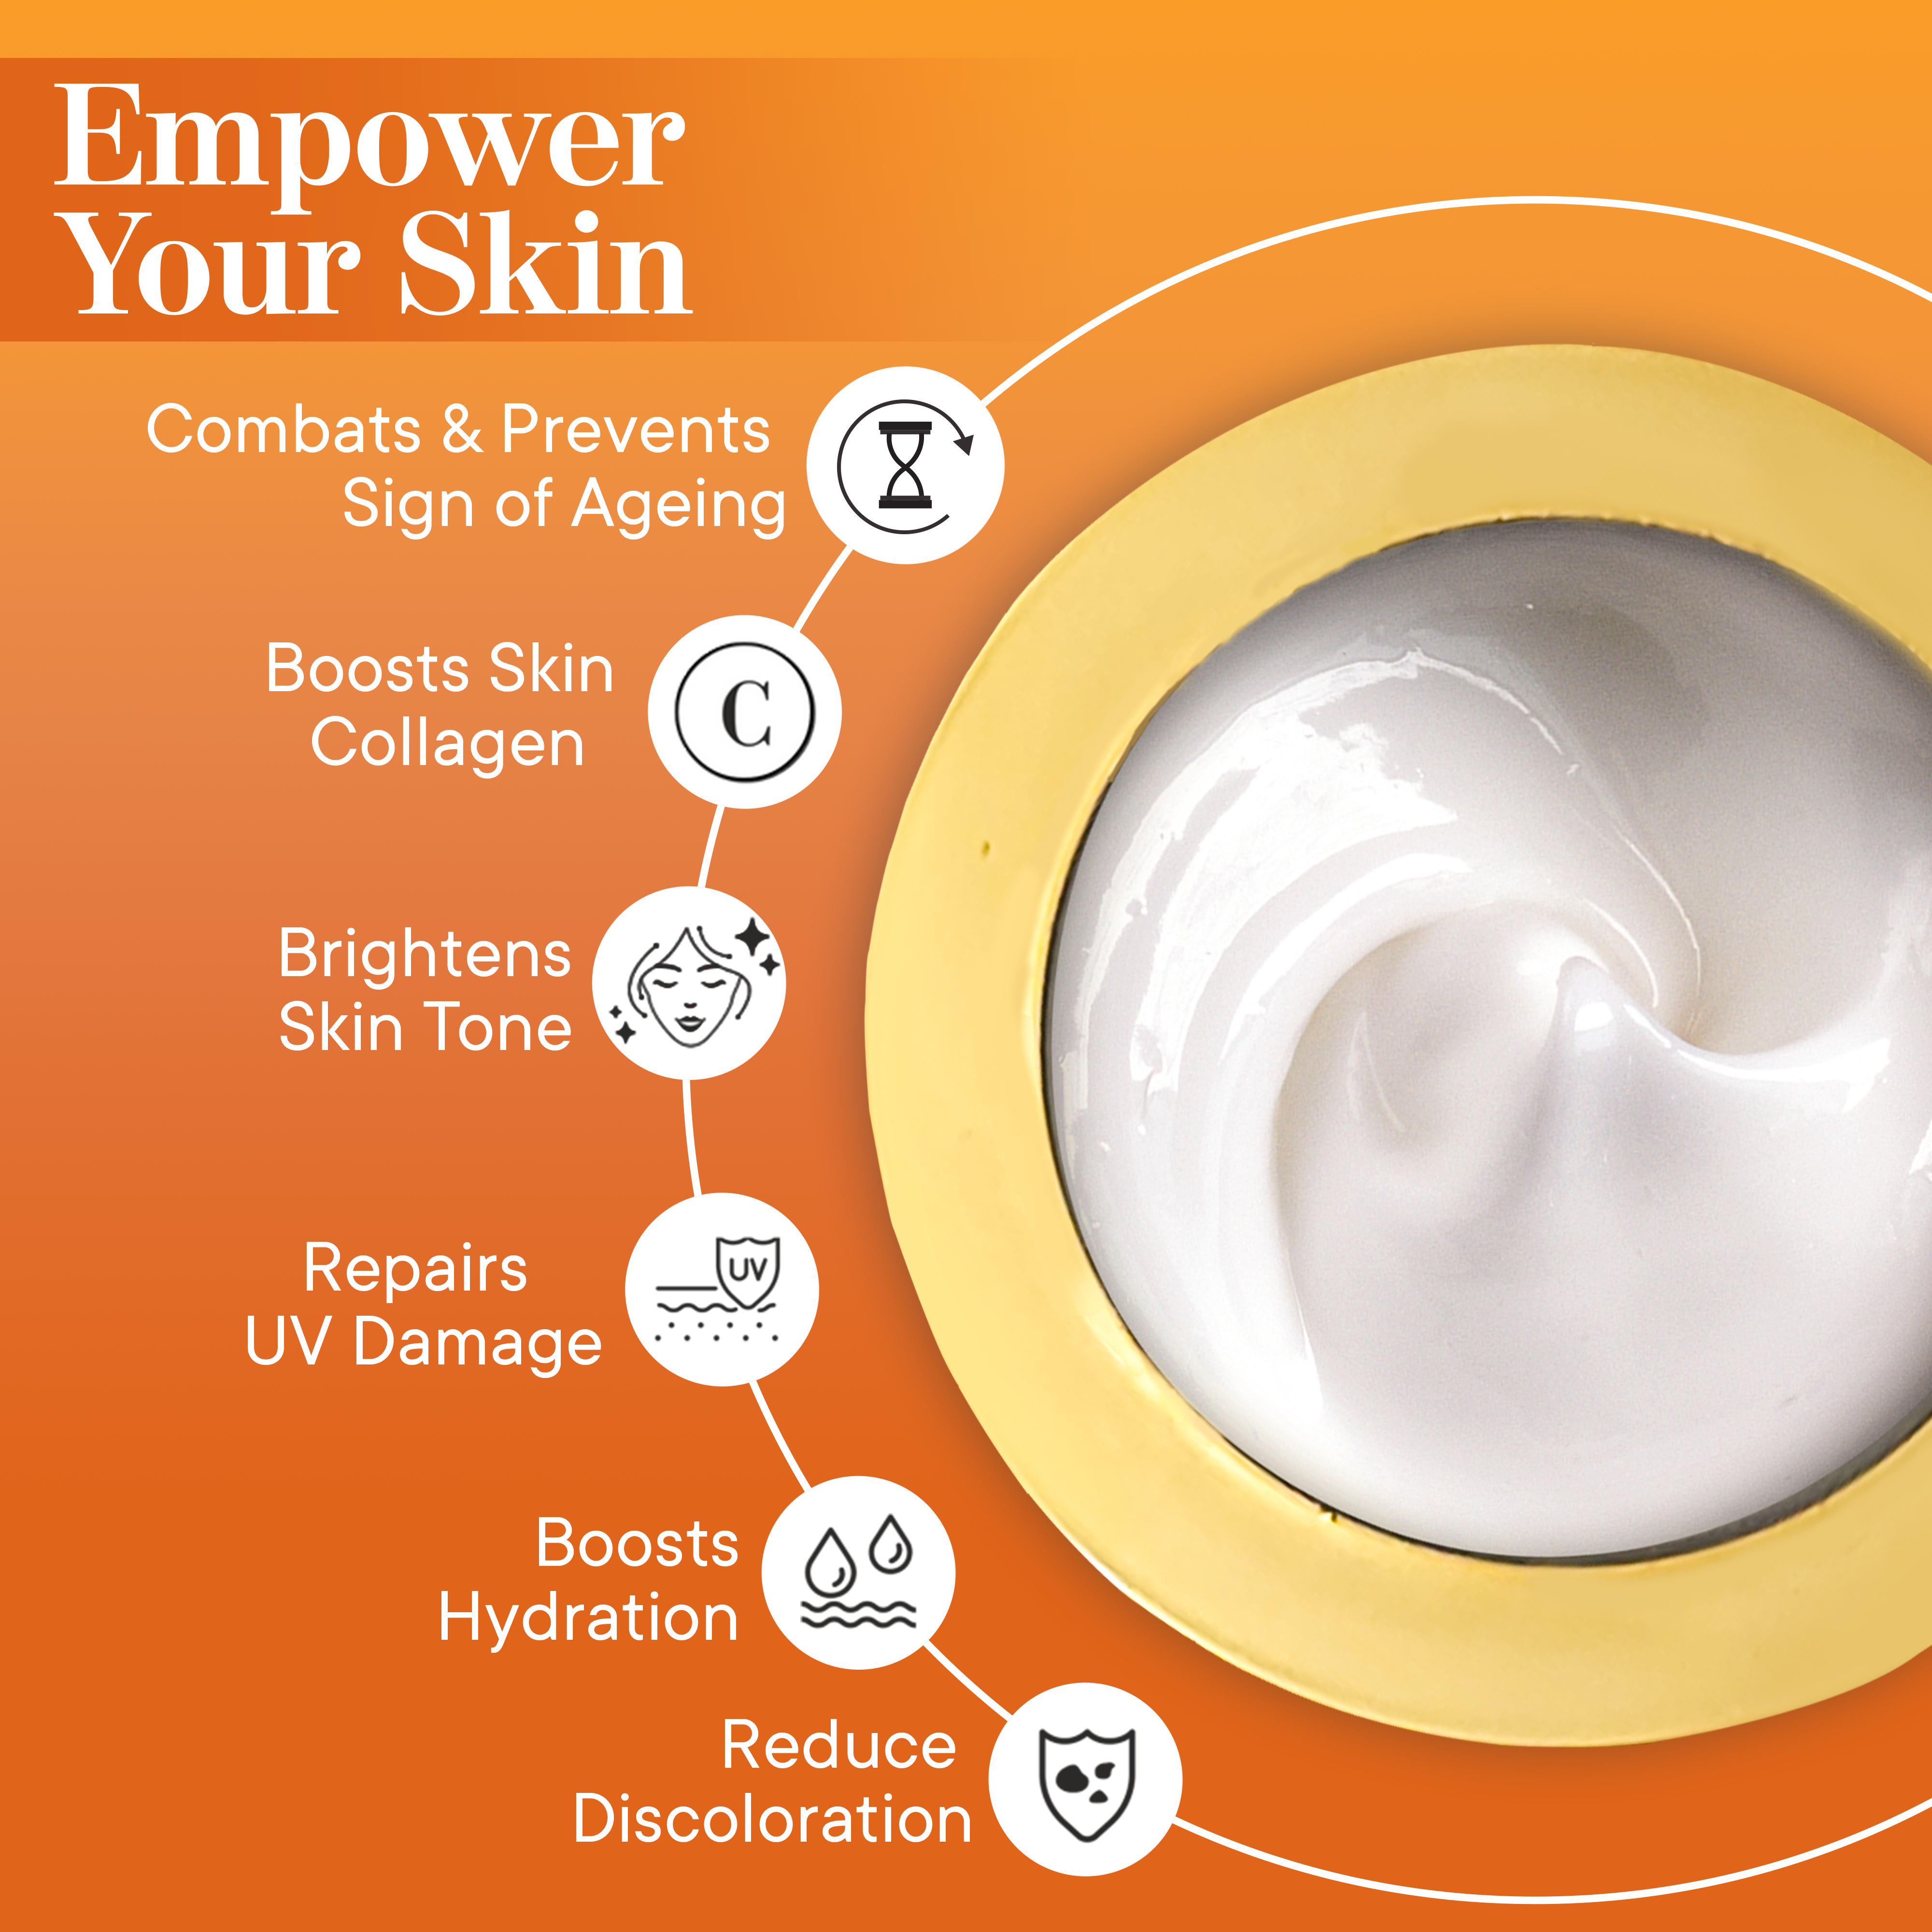 See the Radiance Face Cream Benefits